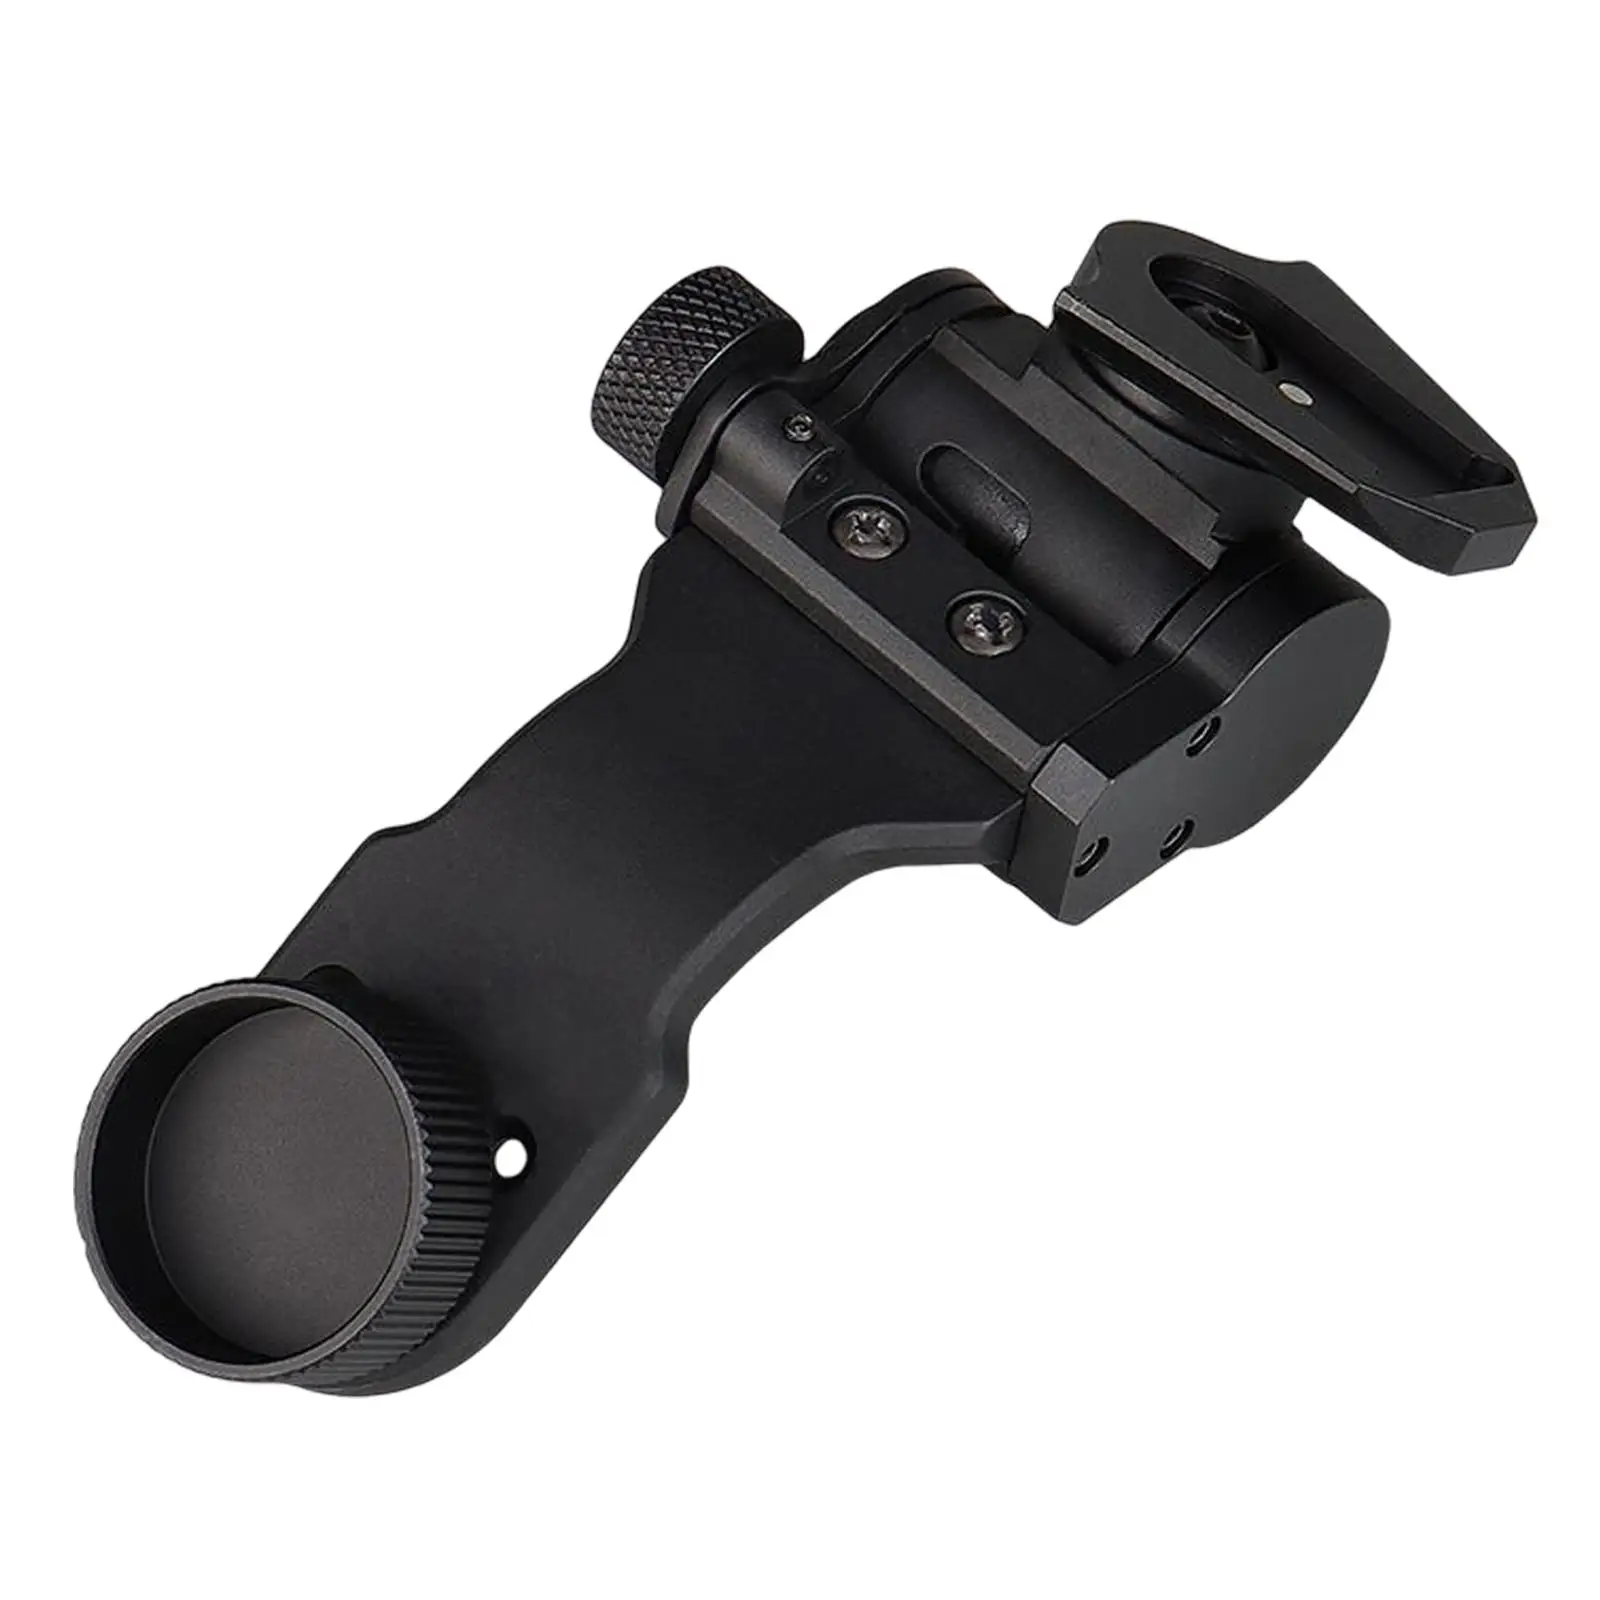 Outdoor Activities Hunting J Arm Adapter Nvg Durable Stable Helmets Mounting Bracket for Outdoor Sports Accessories